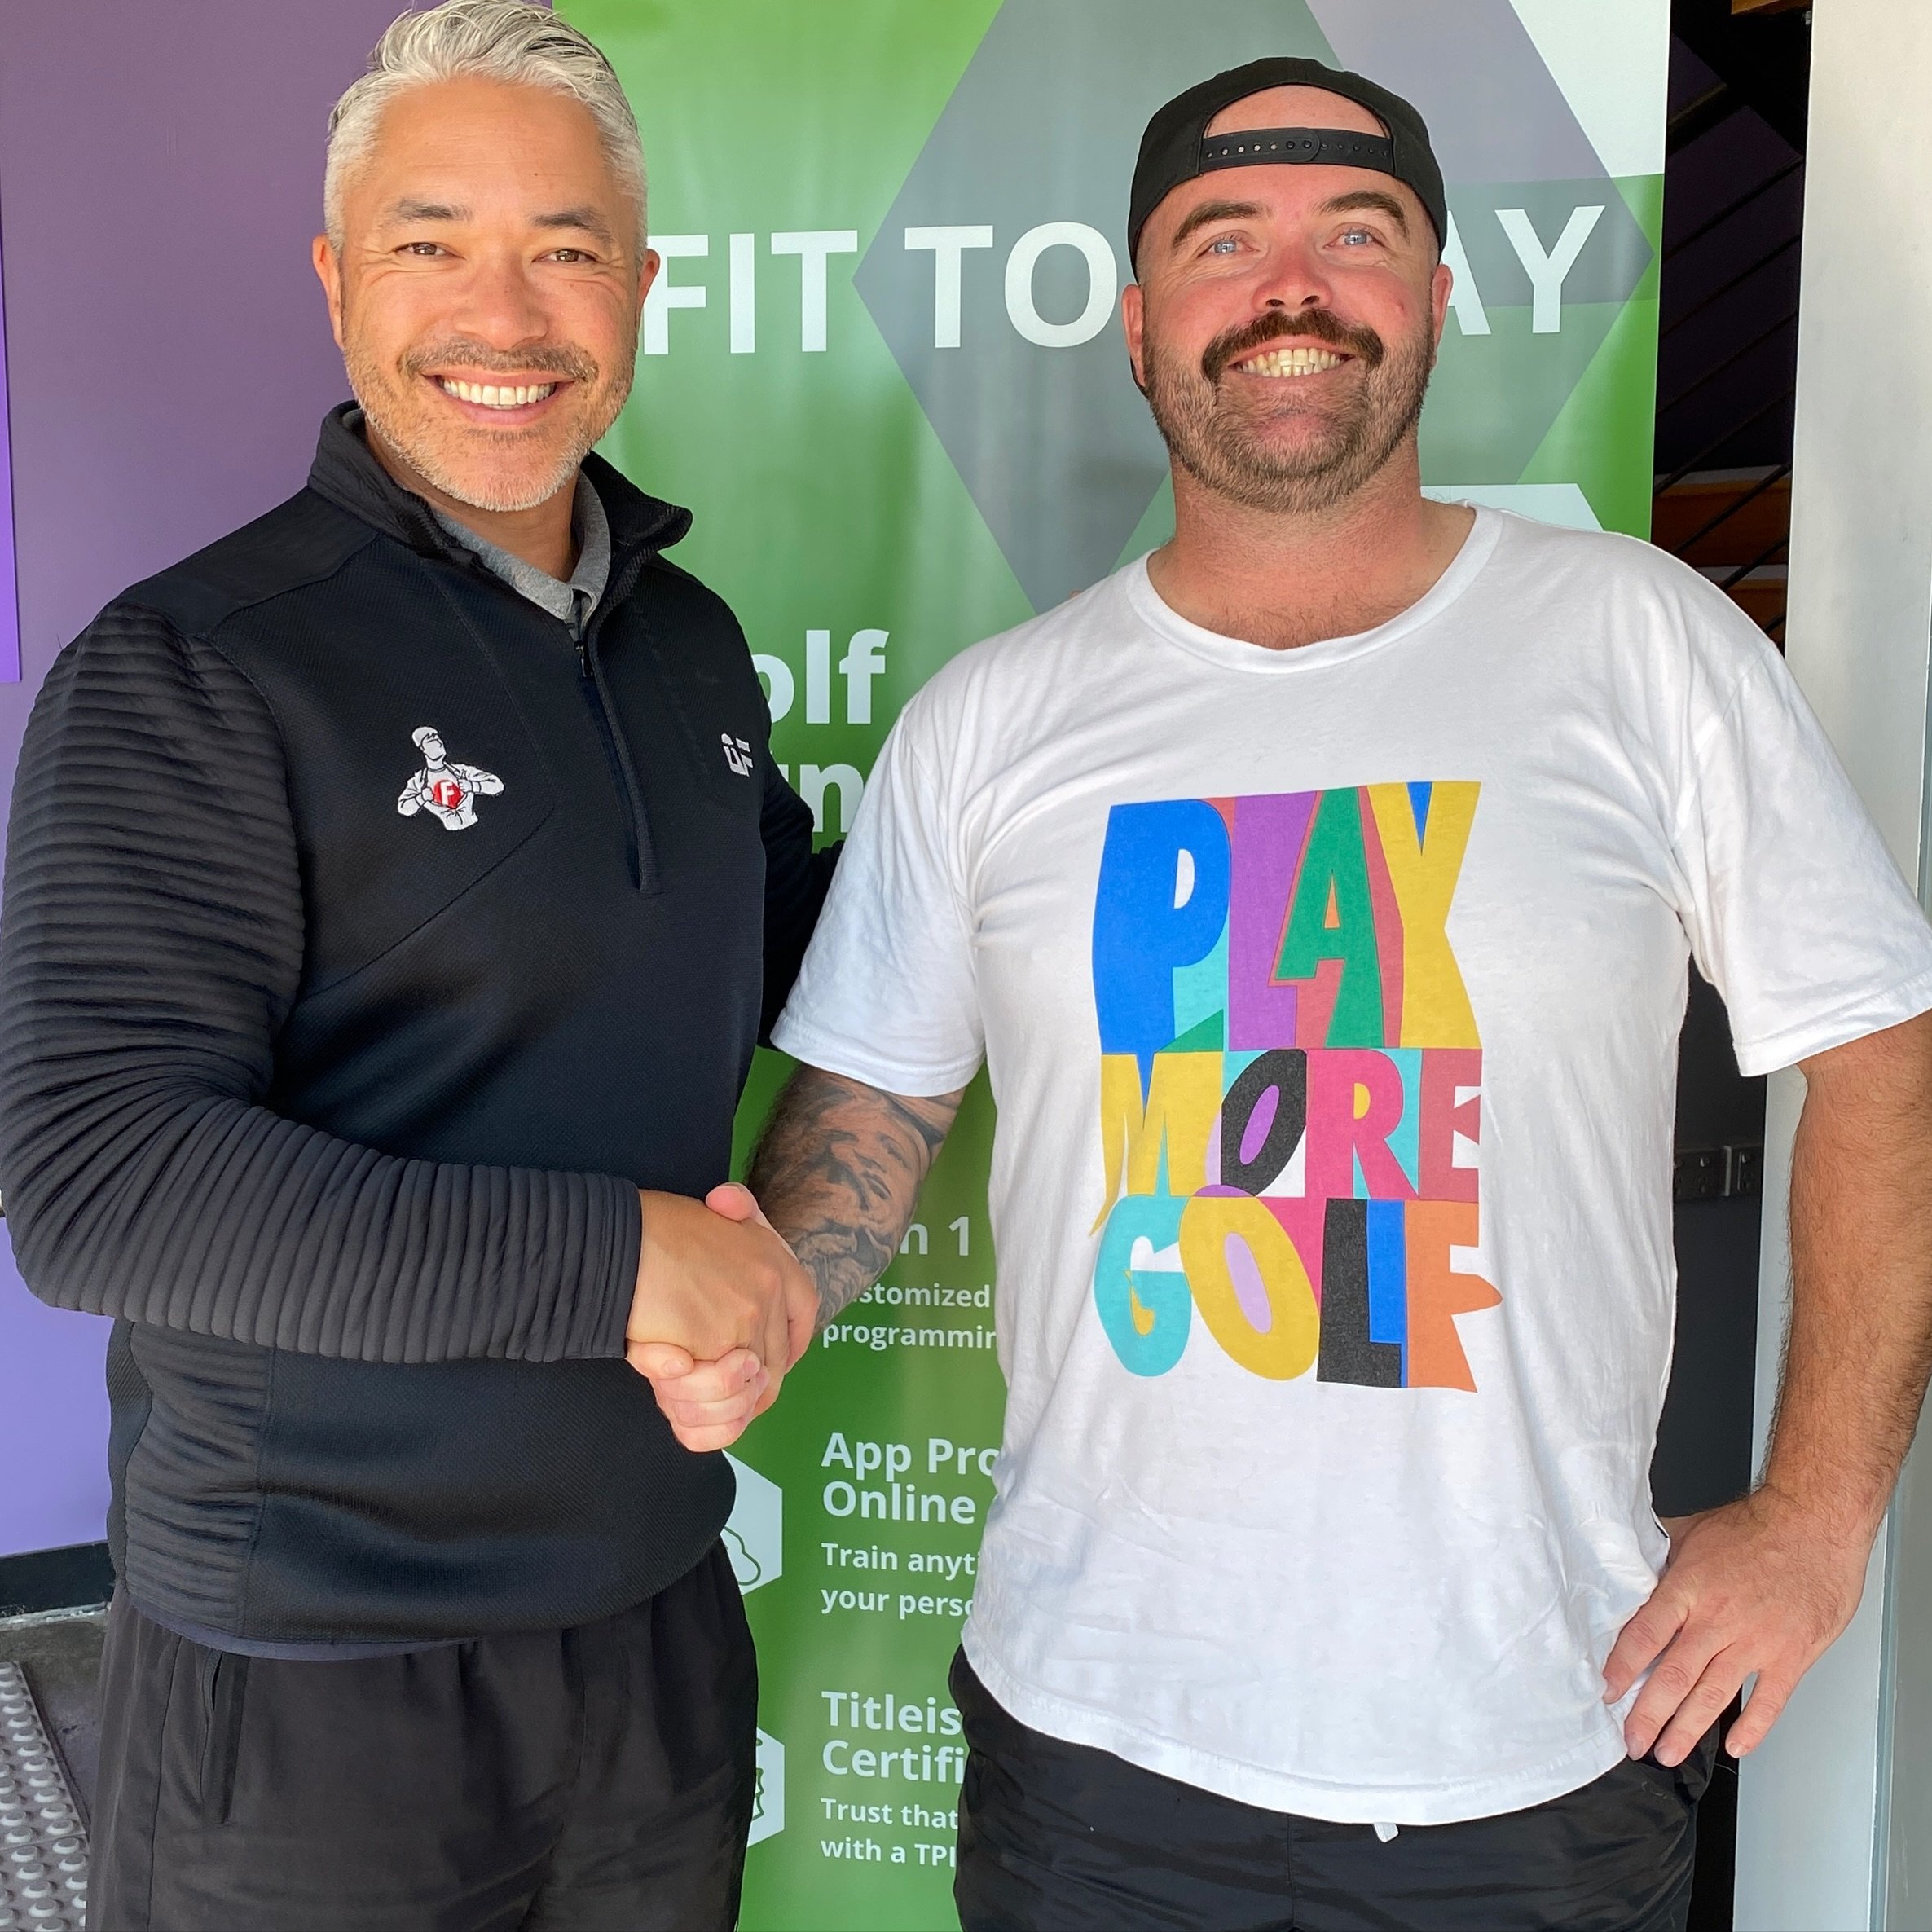 As the tee shirt says &ldquo;play more golf!&rdquo;. Great to have Matt join us to get the body in shape over the winter golf season and for the rigours of a young family. 

Now is the time to get the get started with a golf fitness program to make b